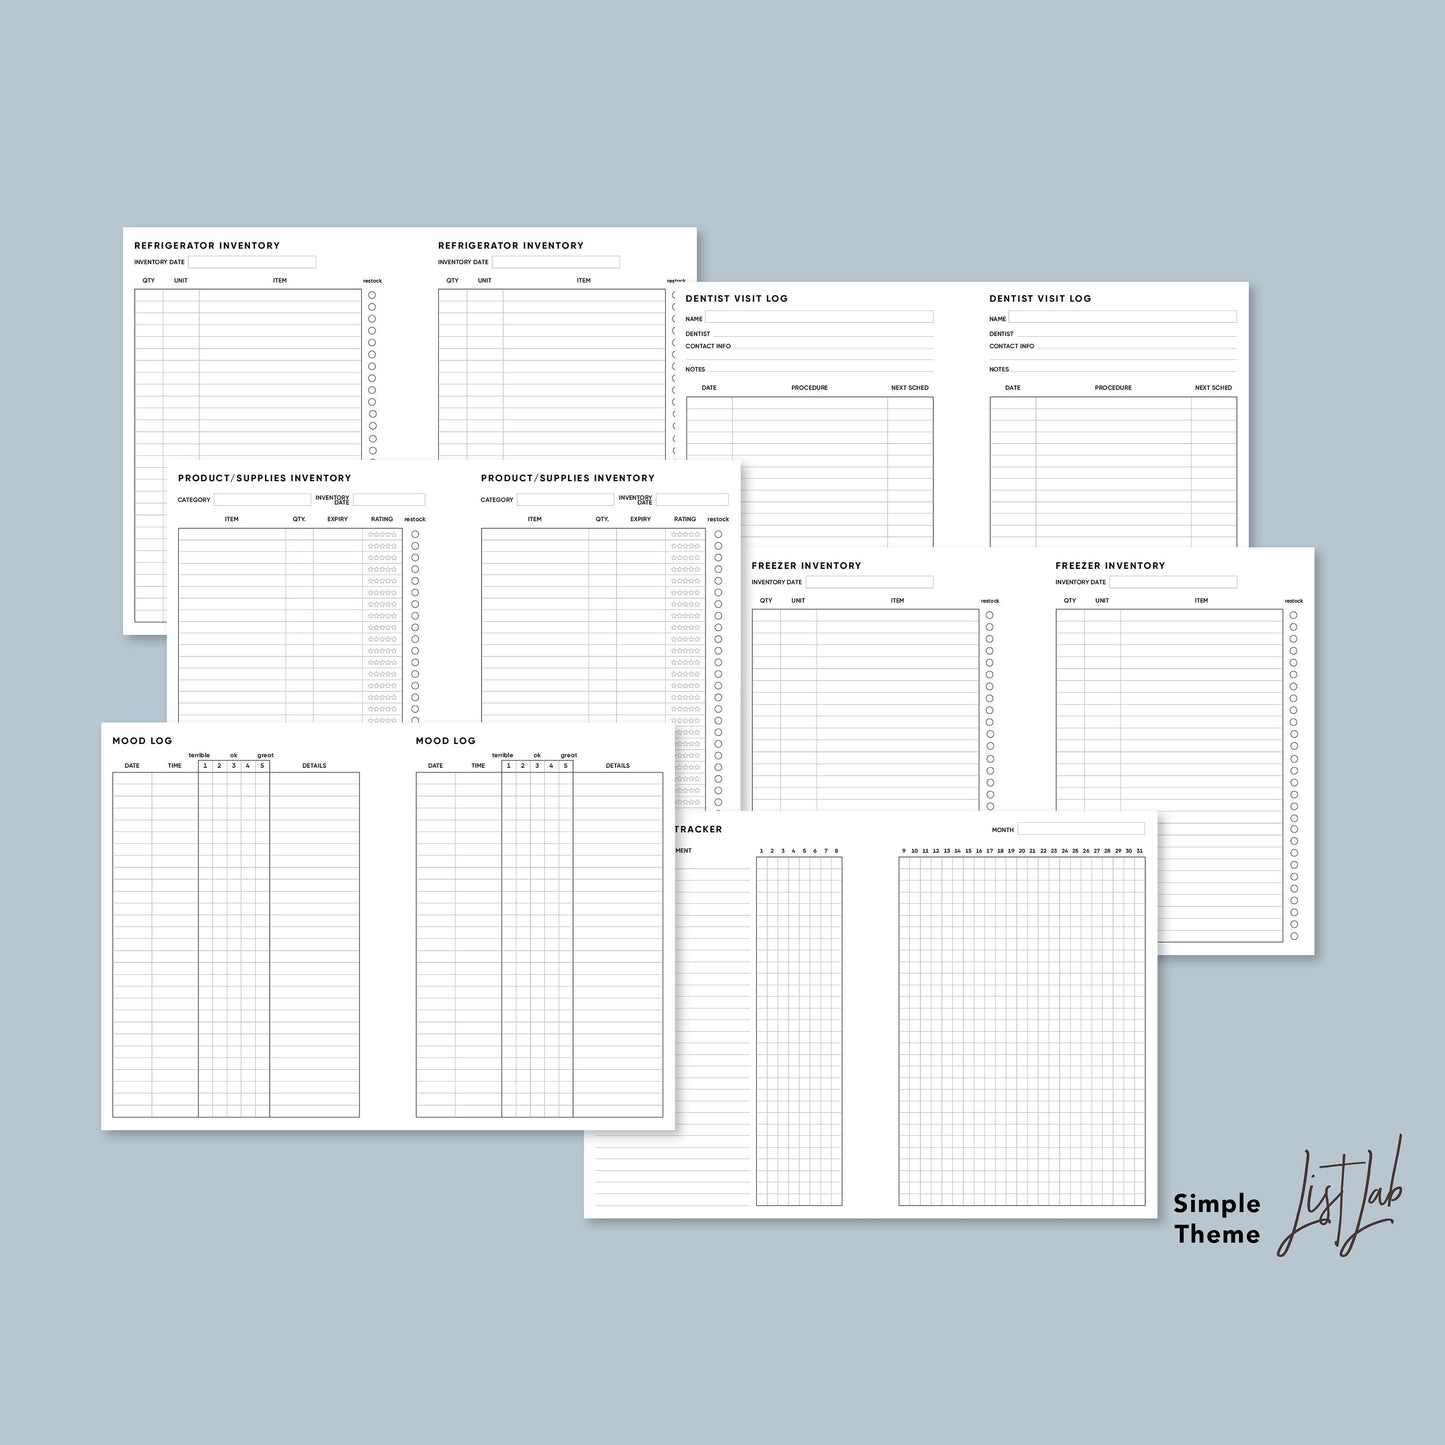 Personal Wide Ring HEALTH KIT Printable Insert Set